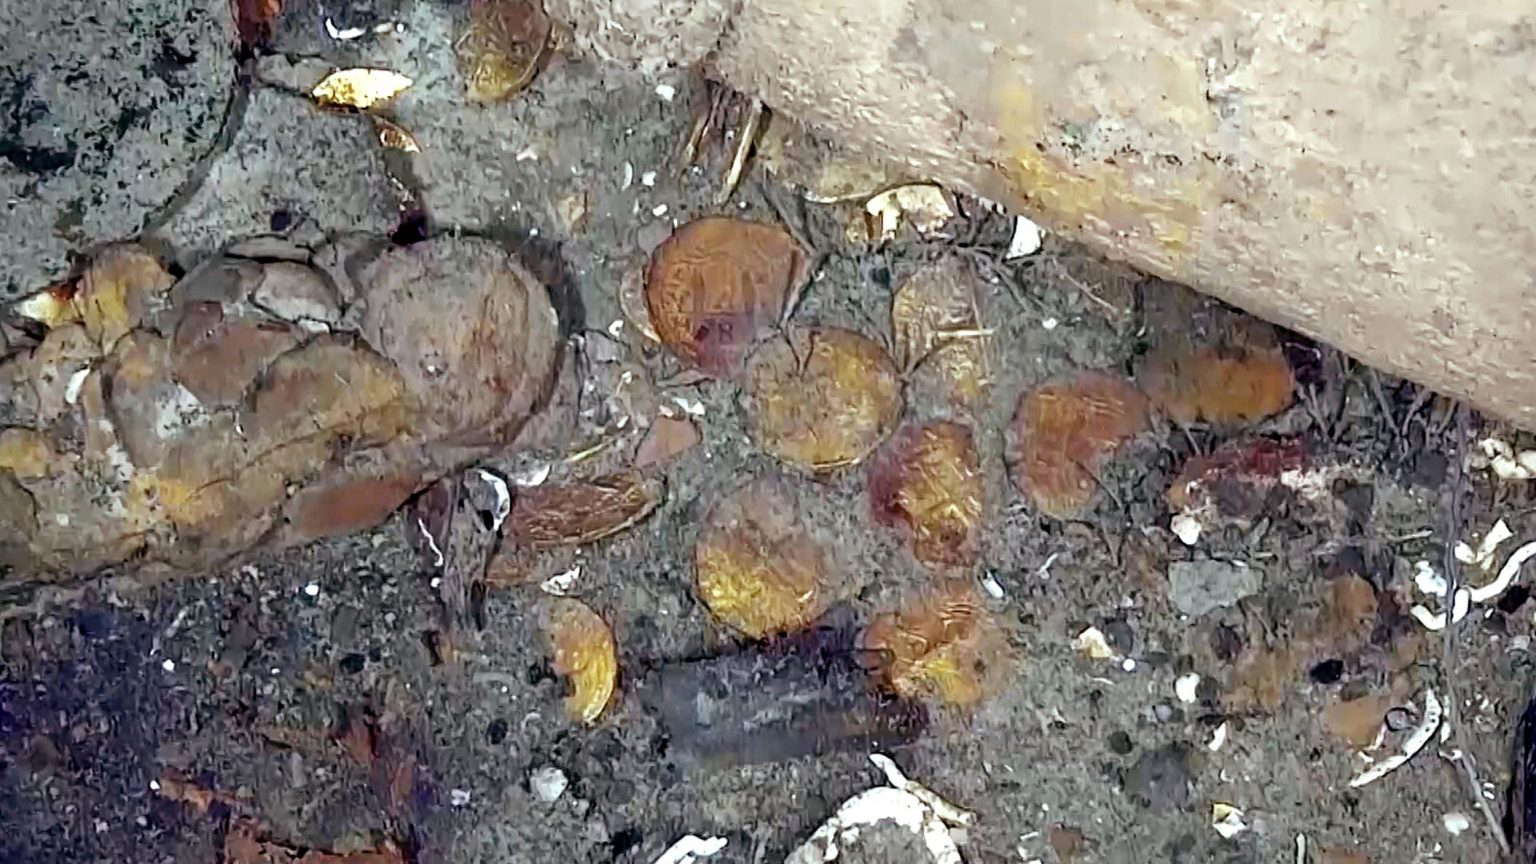 The latest photographs and video also show gold coins from the ship's cargo of treasure, now lying on the seafloor.